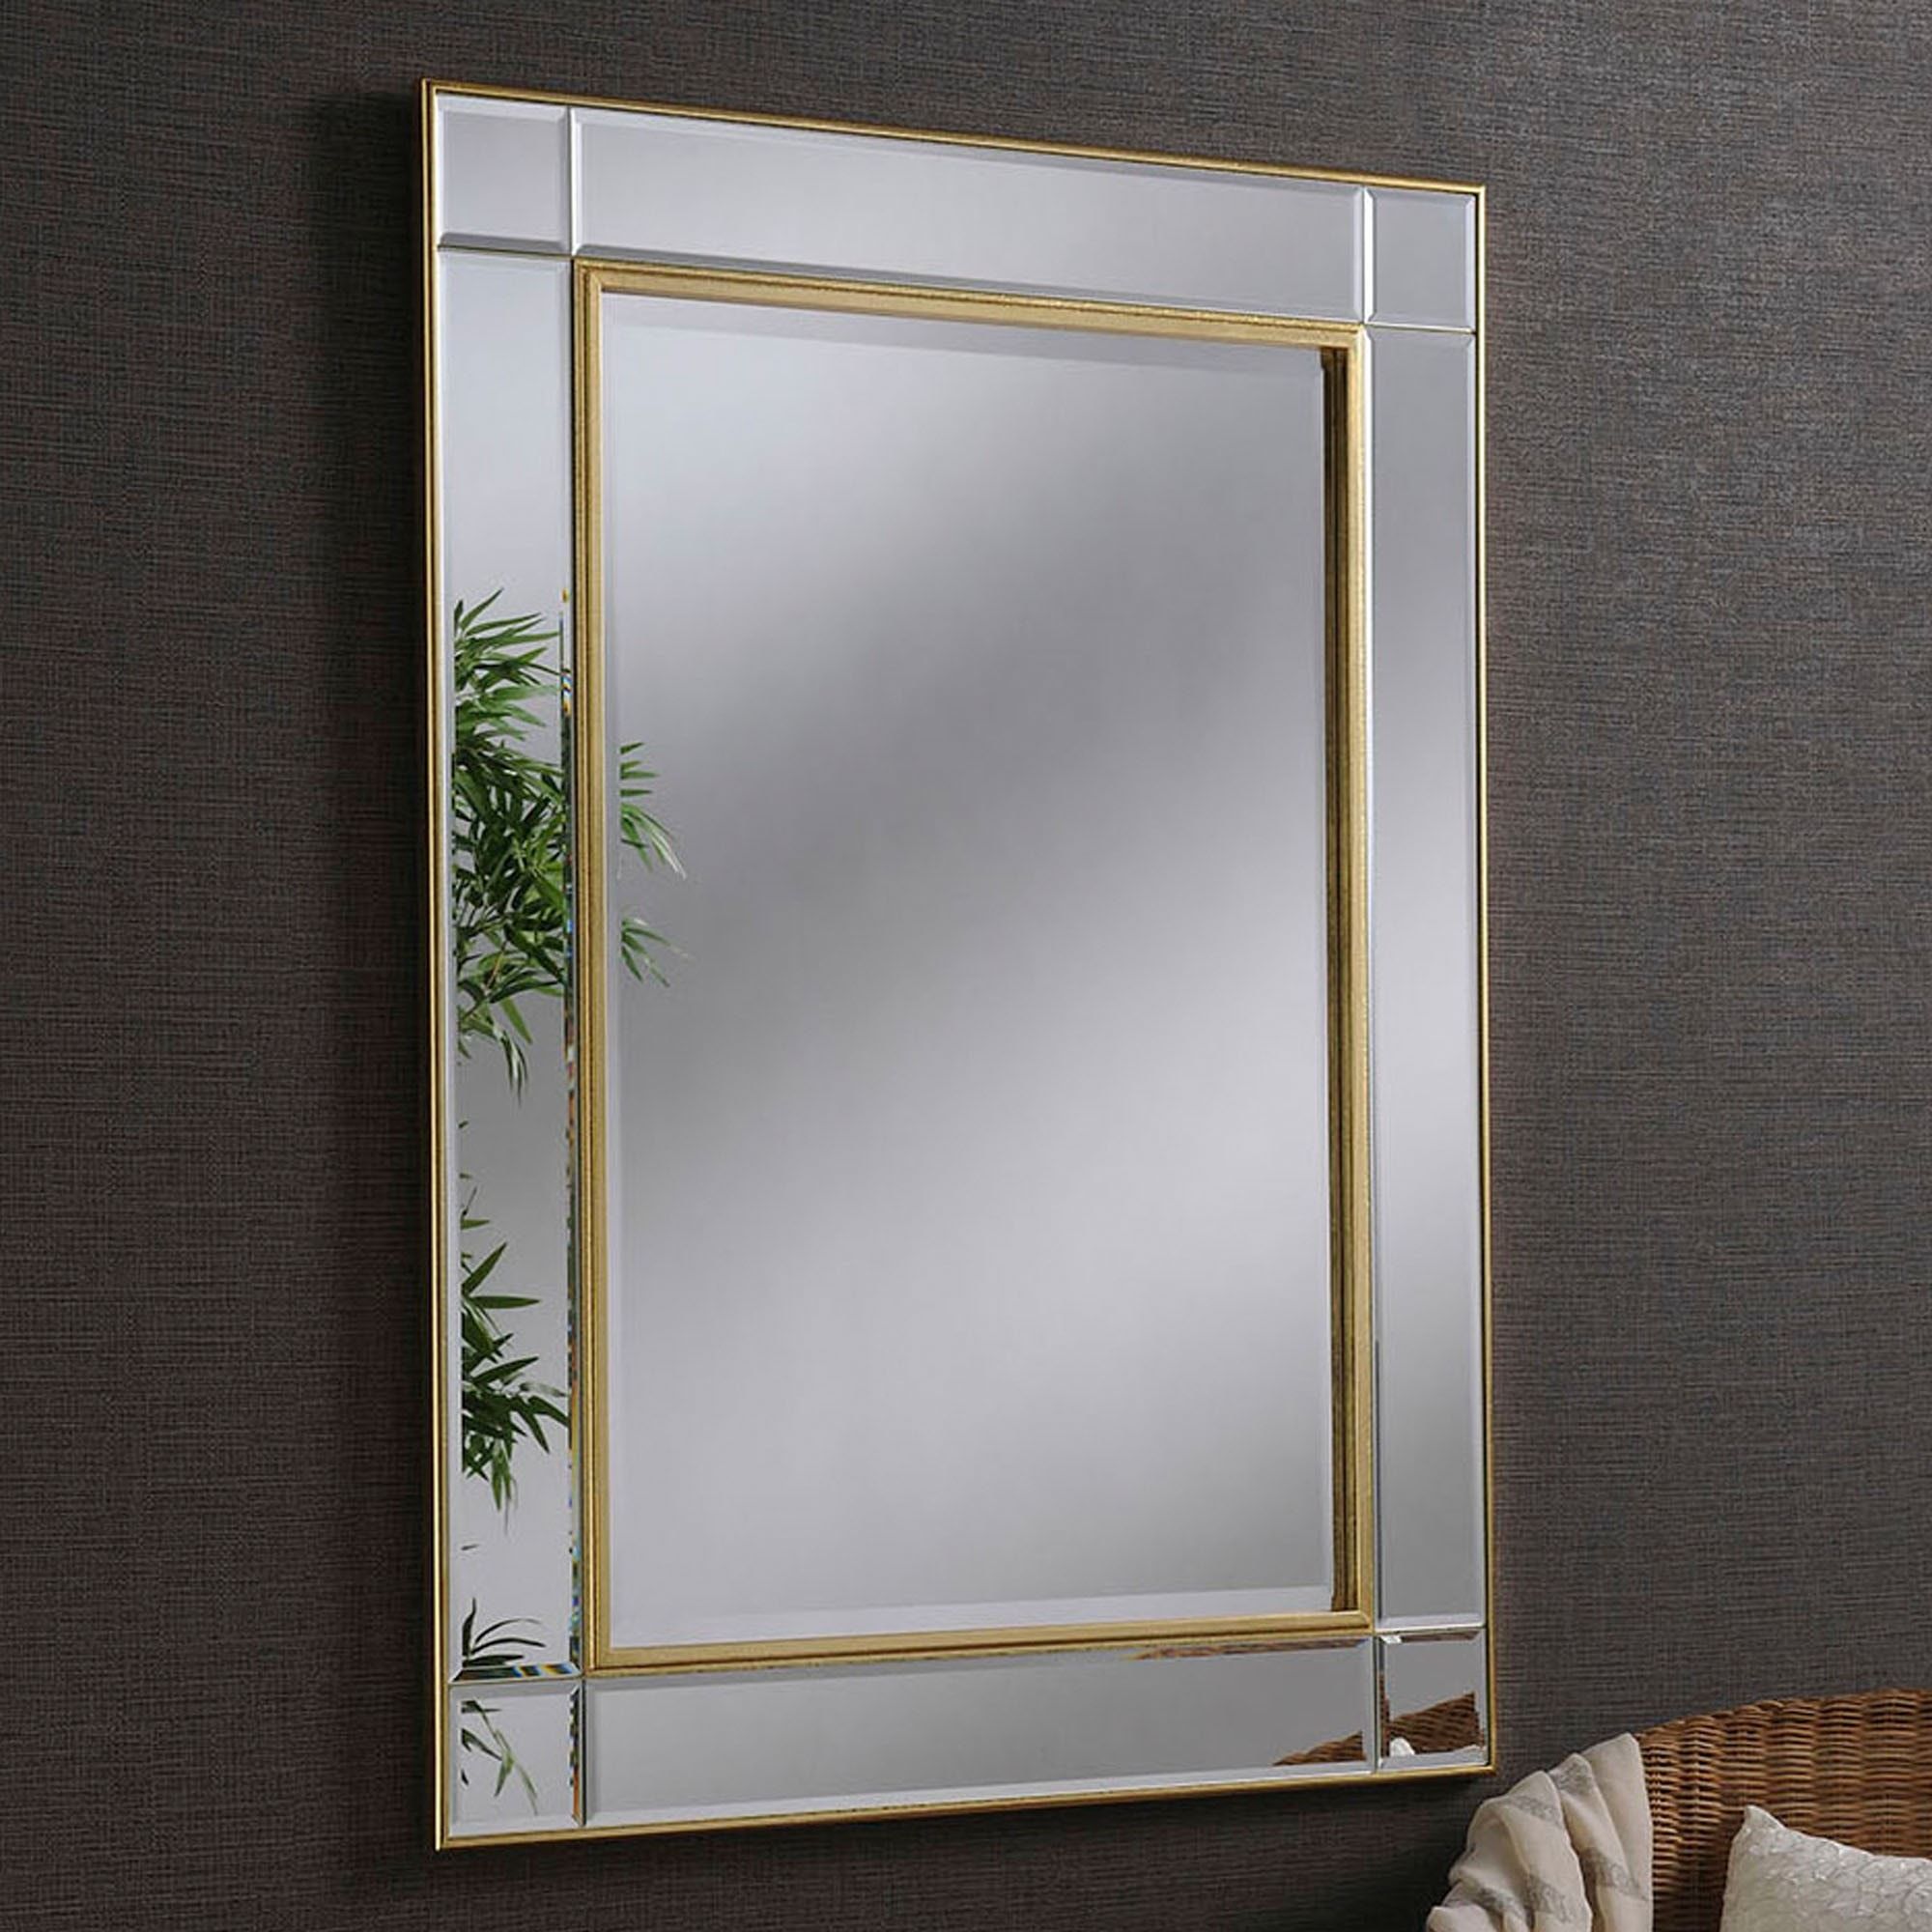 Contemporary Gold Beveled Wall Mirror | Contemporary Wall Mirrors With Regard To Sartain Modern & Contemporary Wall Mirrors (View 10 of 15)